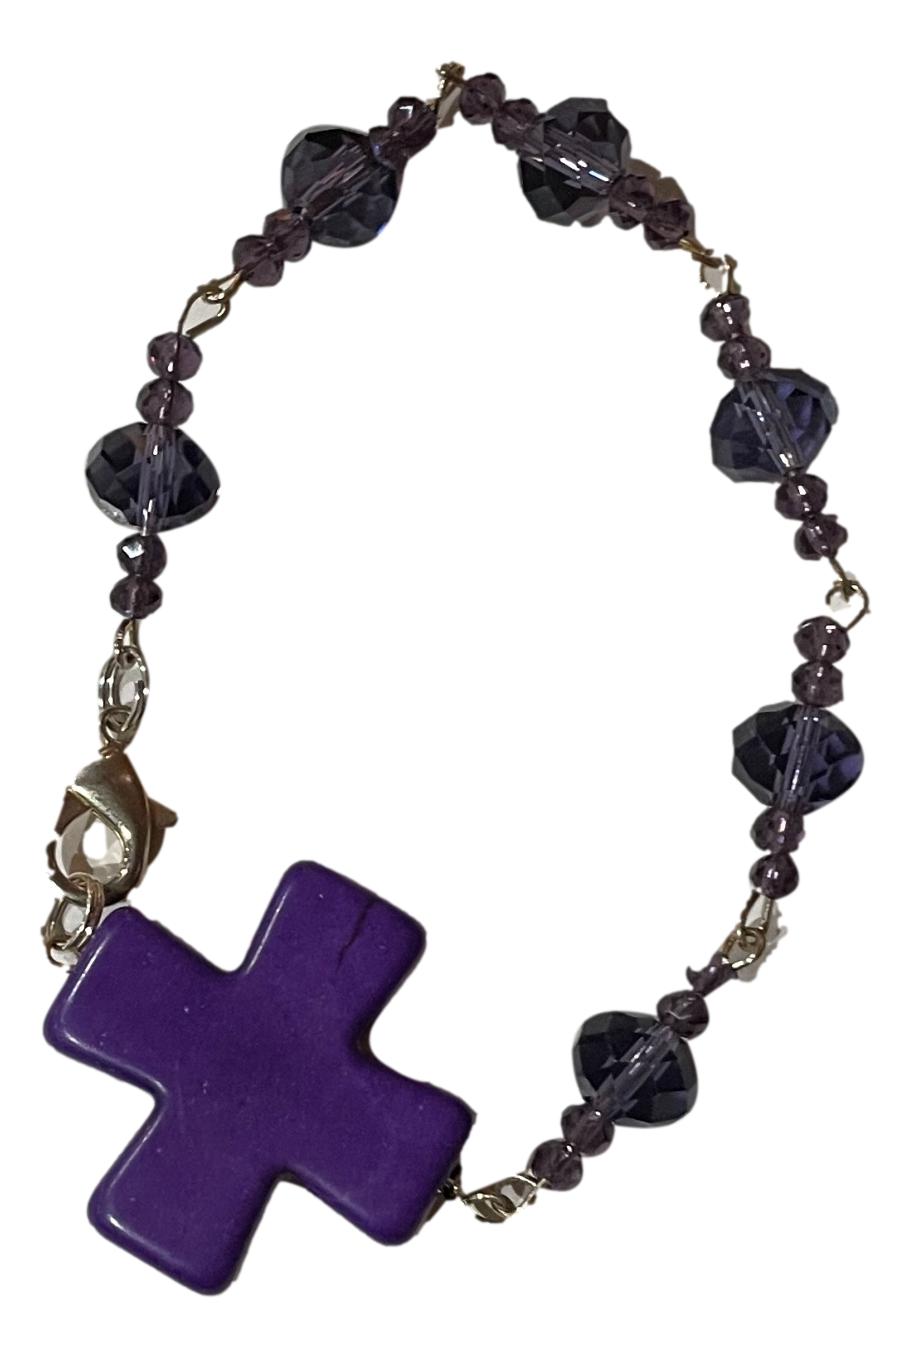 Rosary Bracelet Purple Glass Beads Silver Accent Purple Wall Decor Cross - Ysleta Mission Gift Shop- VOTED El Paso's Best Gift Shop